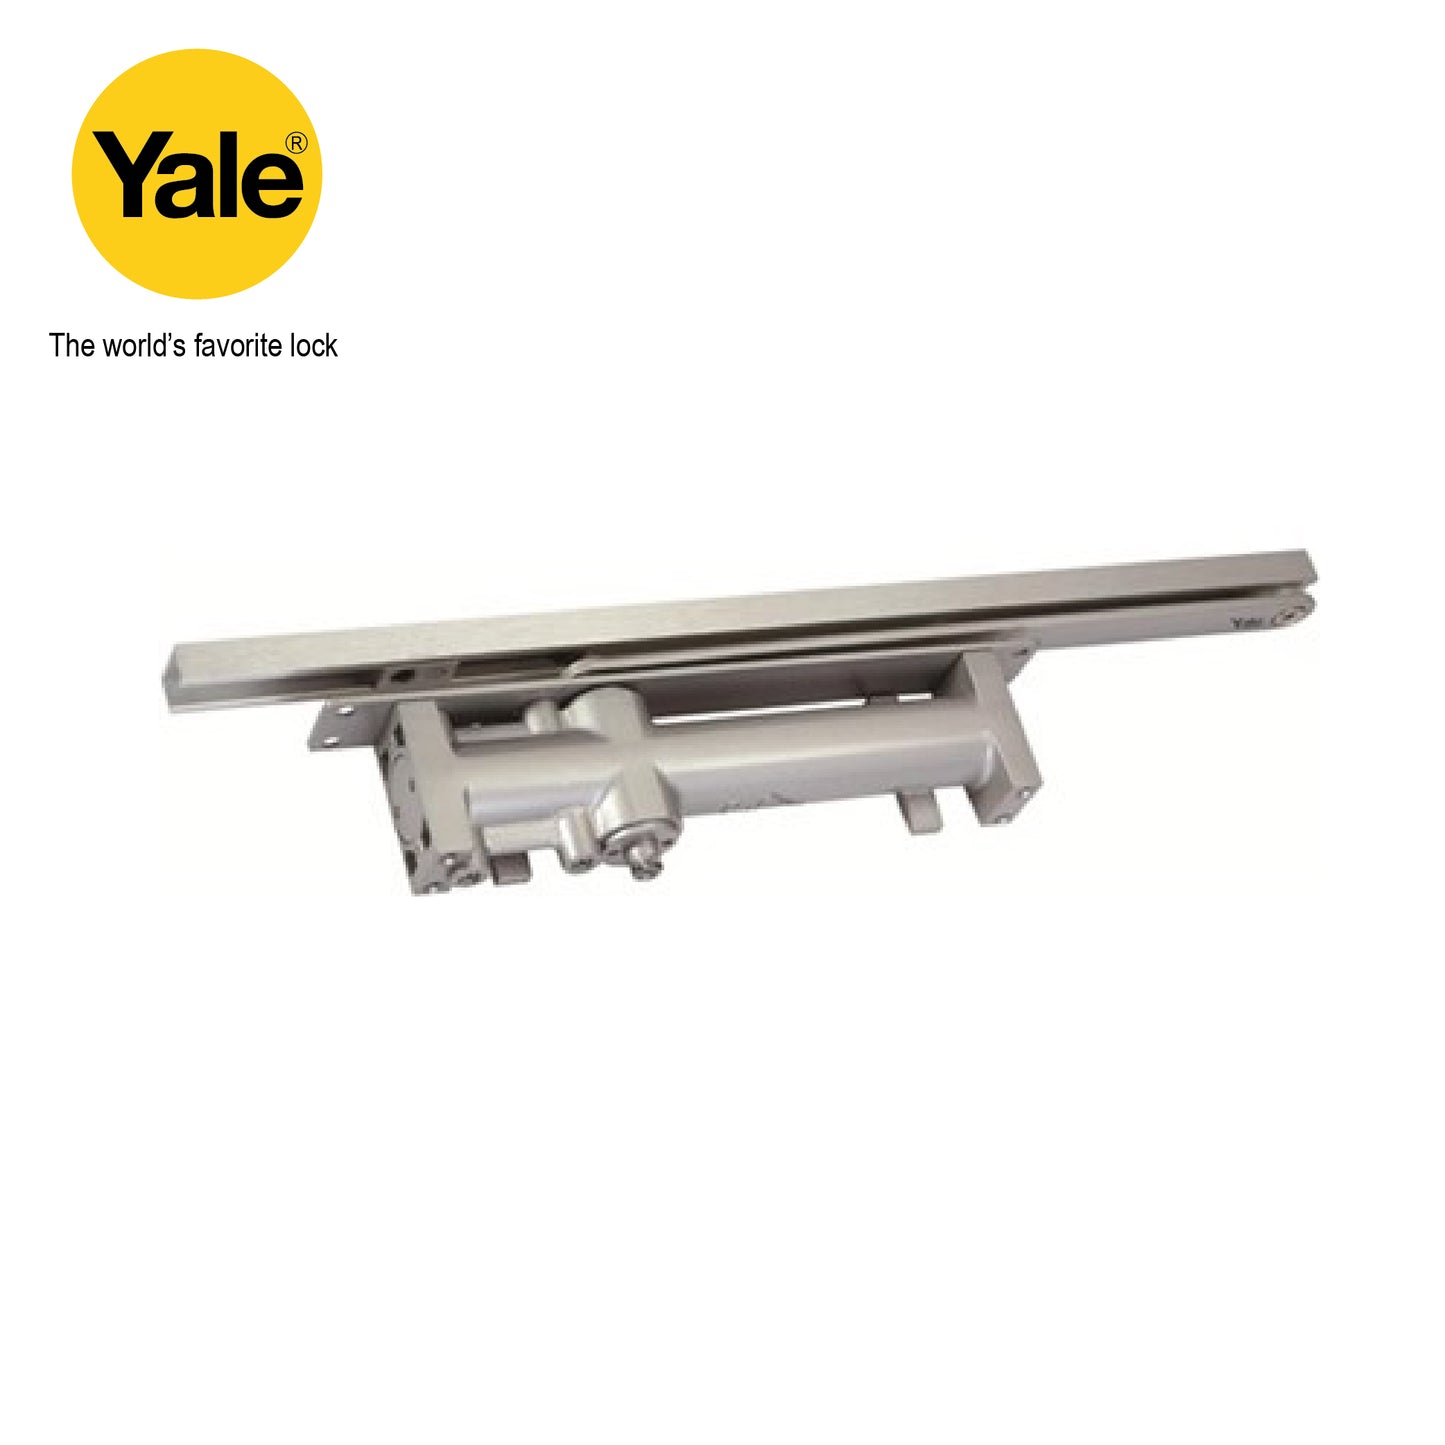 Yale Concealed Door Closer Hold Open Maximum Door Weight 60Kg Silver Finish - YDCR8003H